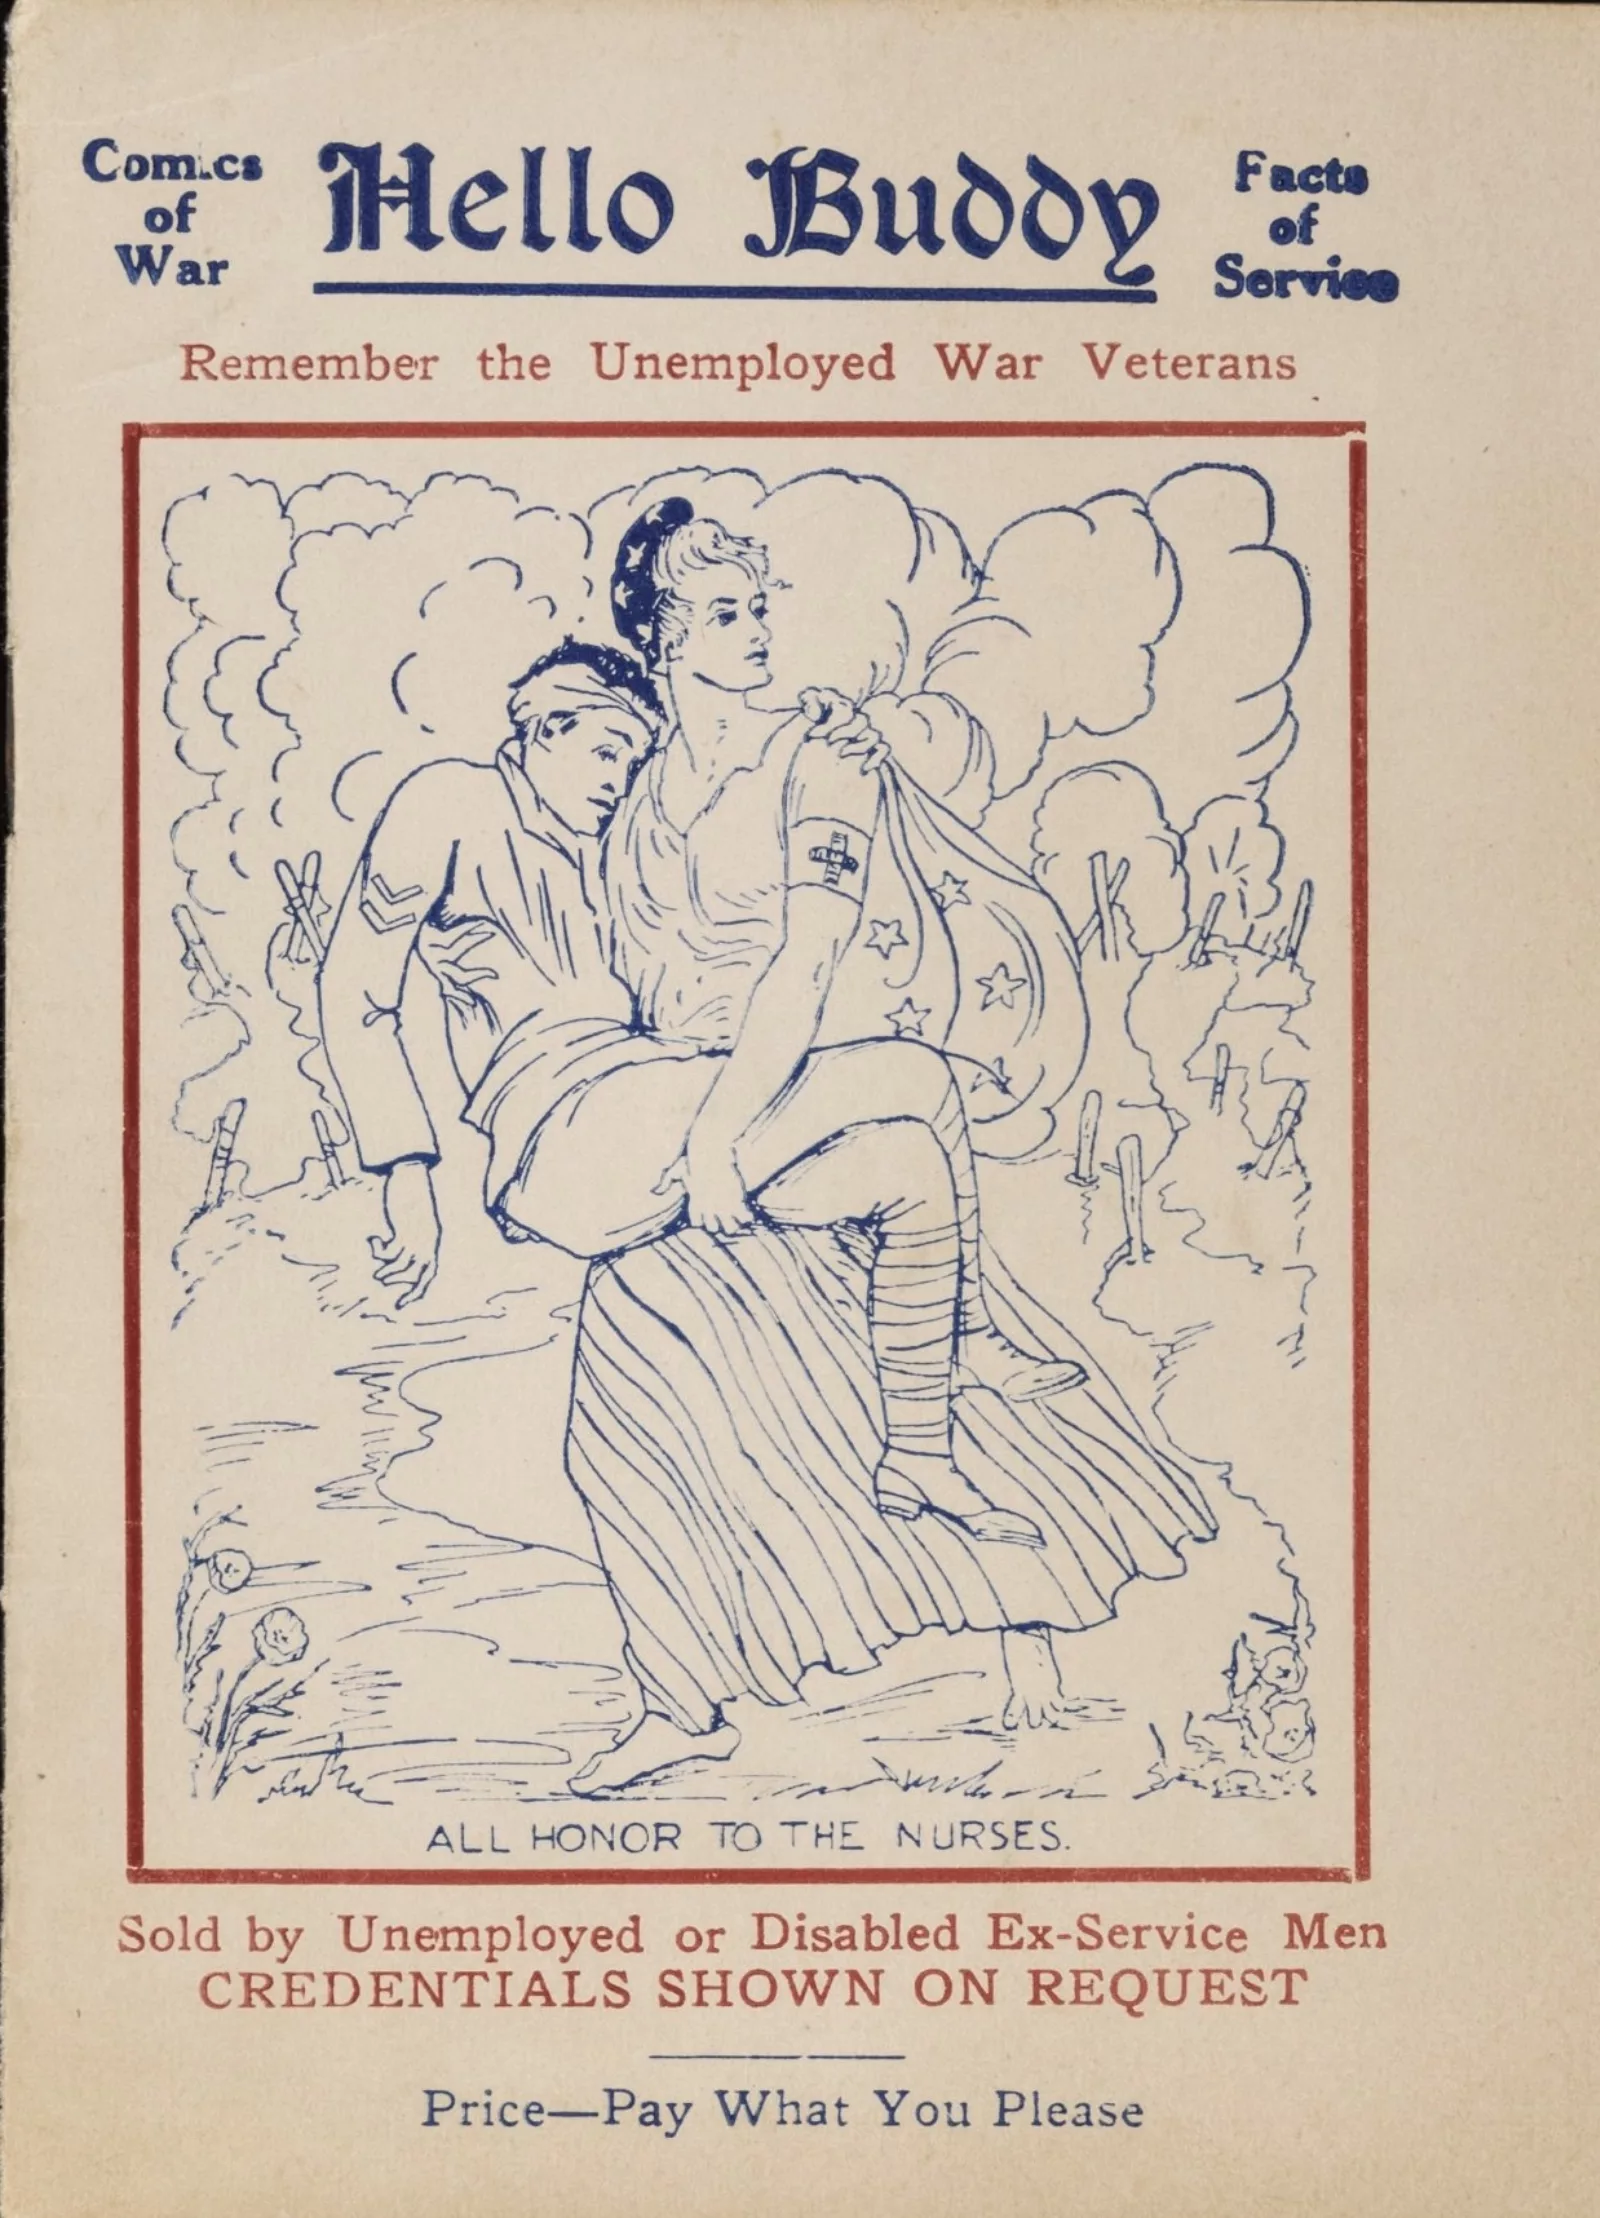 Illustration of a woman (representing America) carrying a wounded soldier across the battlefield. The top of the comic reads, "Hello Buddy. Comics of War, Facts of Service. Remember the Unemployed War Veterans."